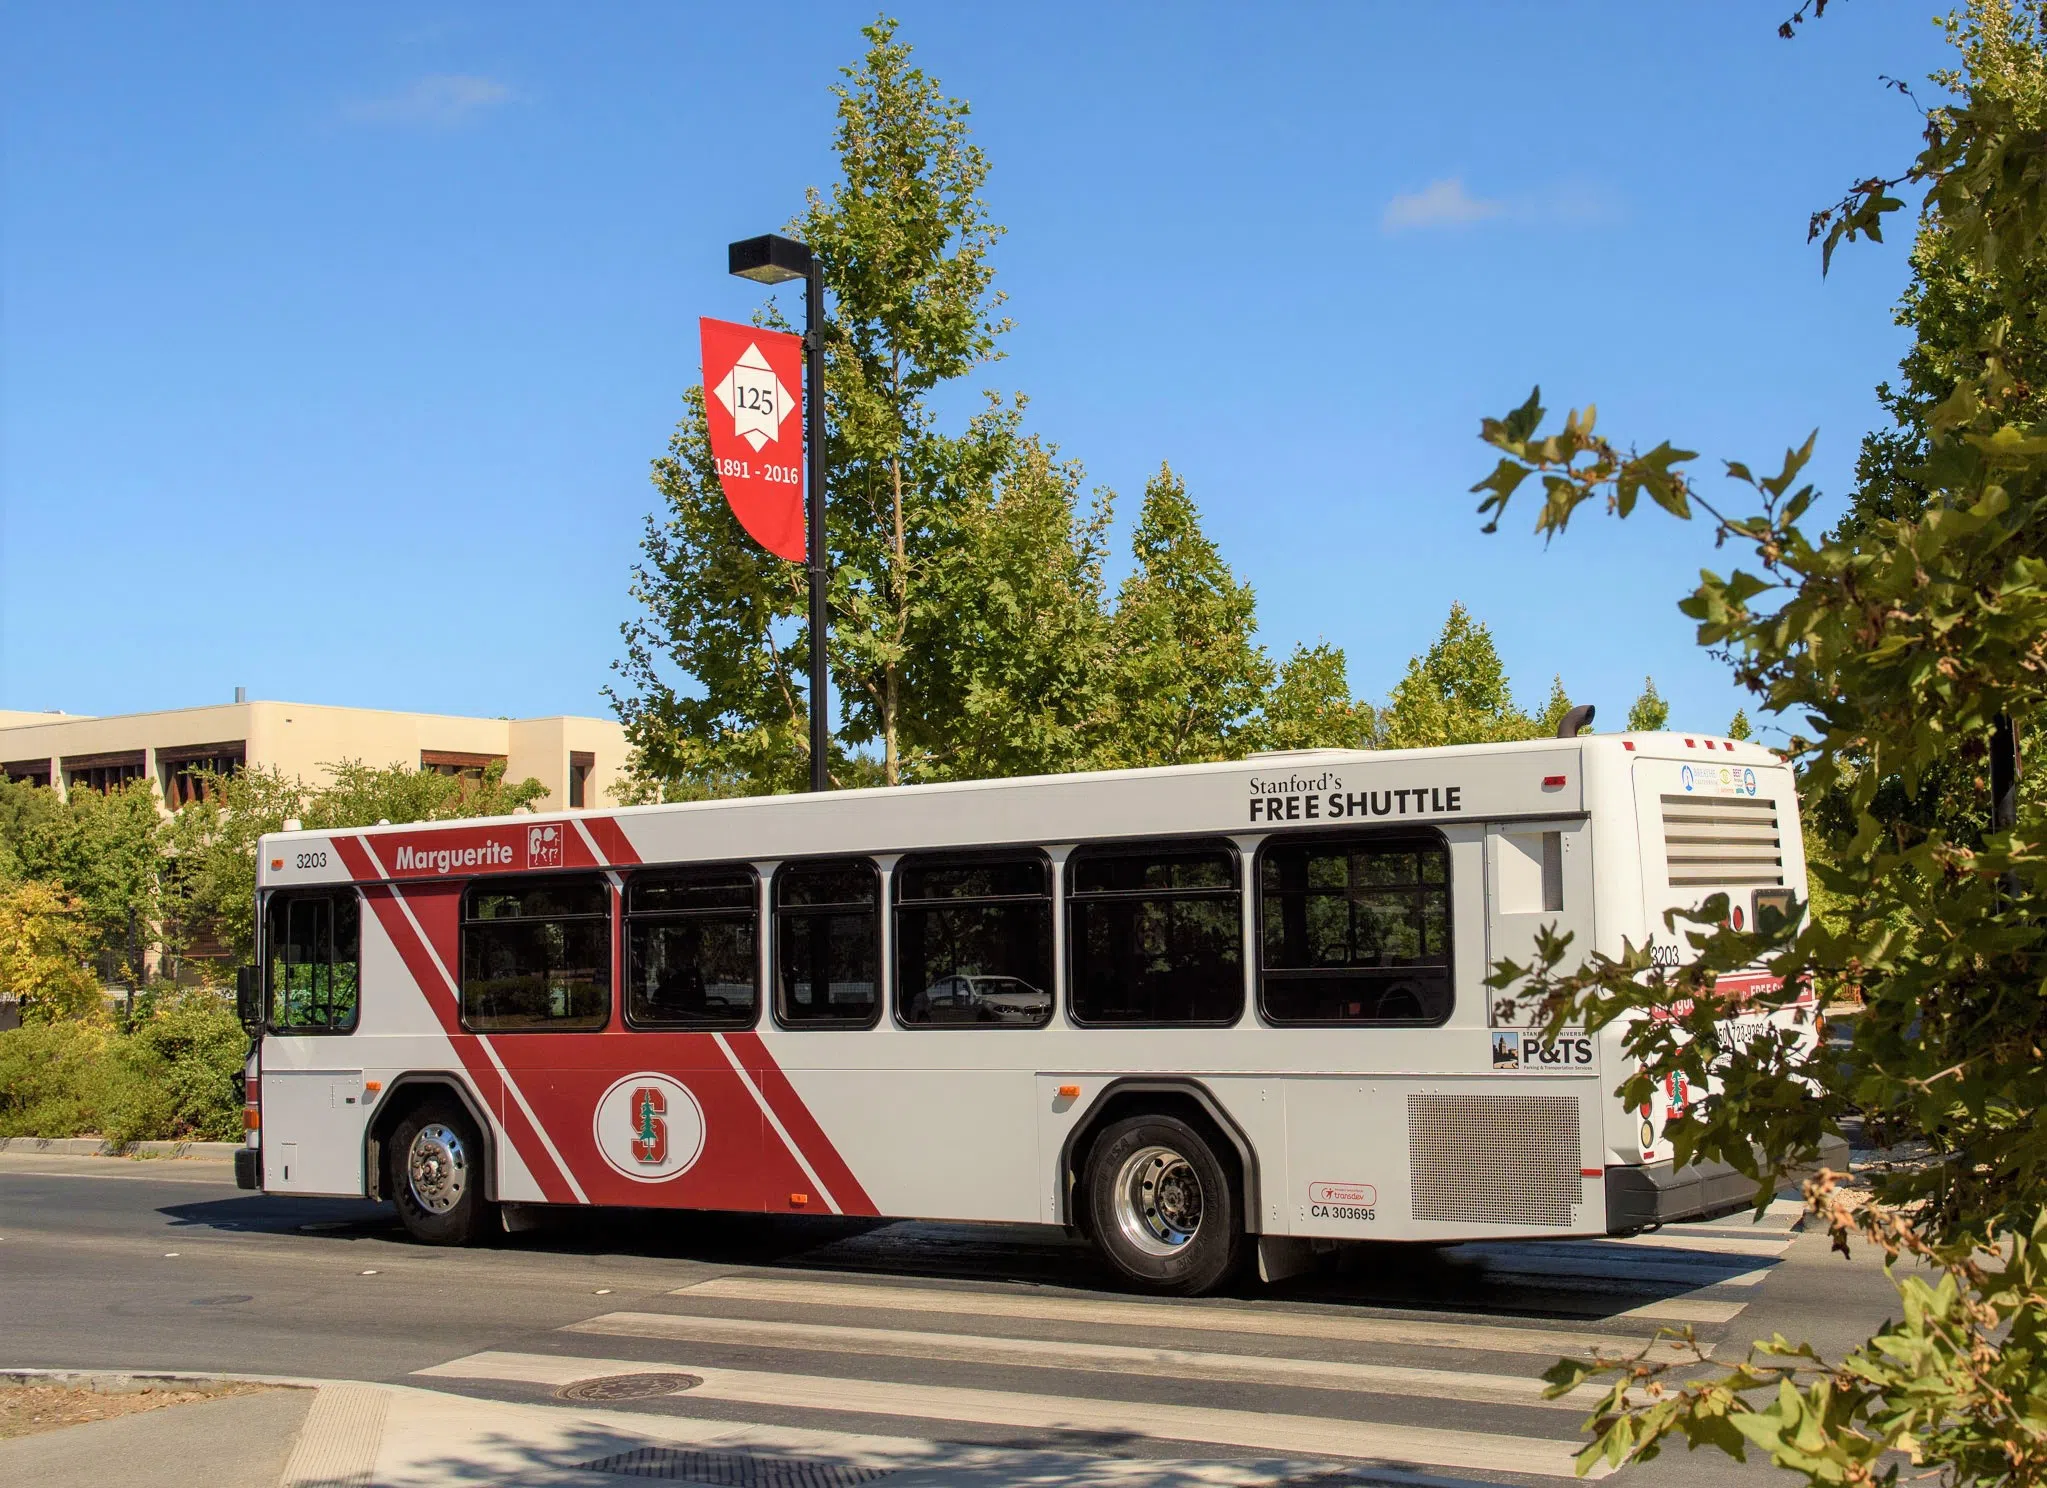 Large passenger bus with Stanford logo on the side